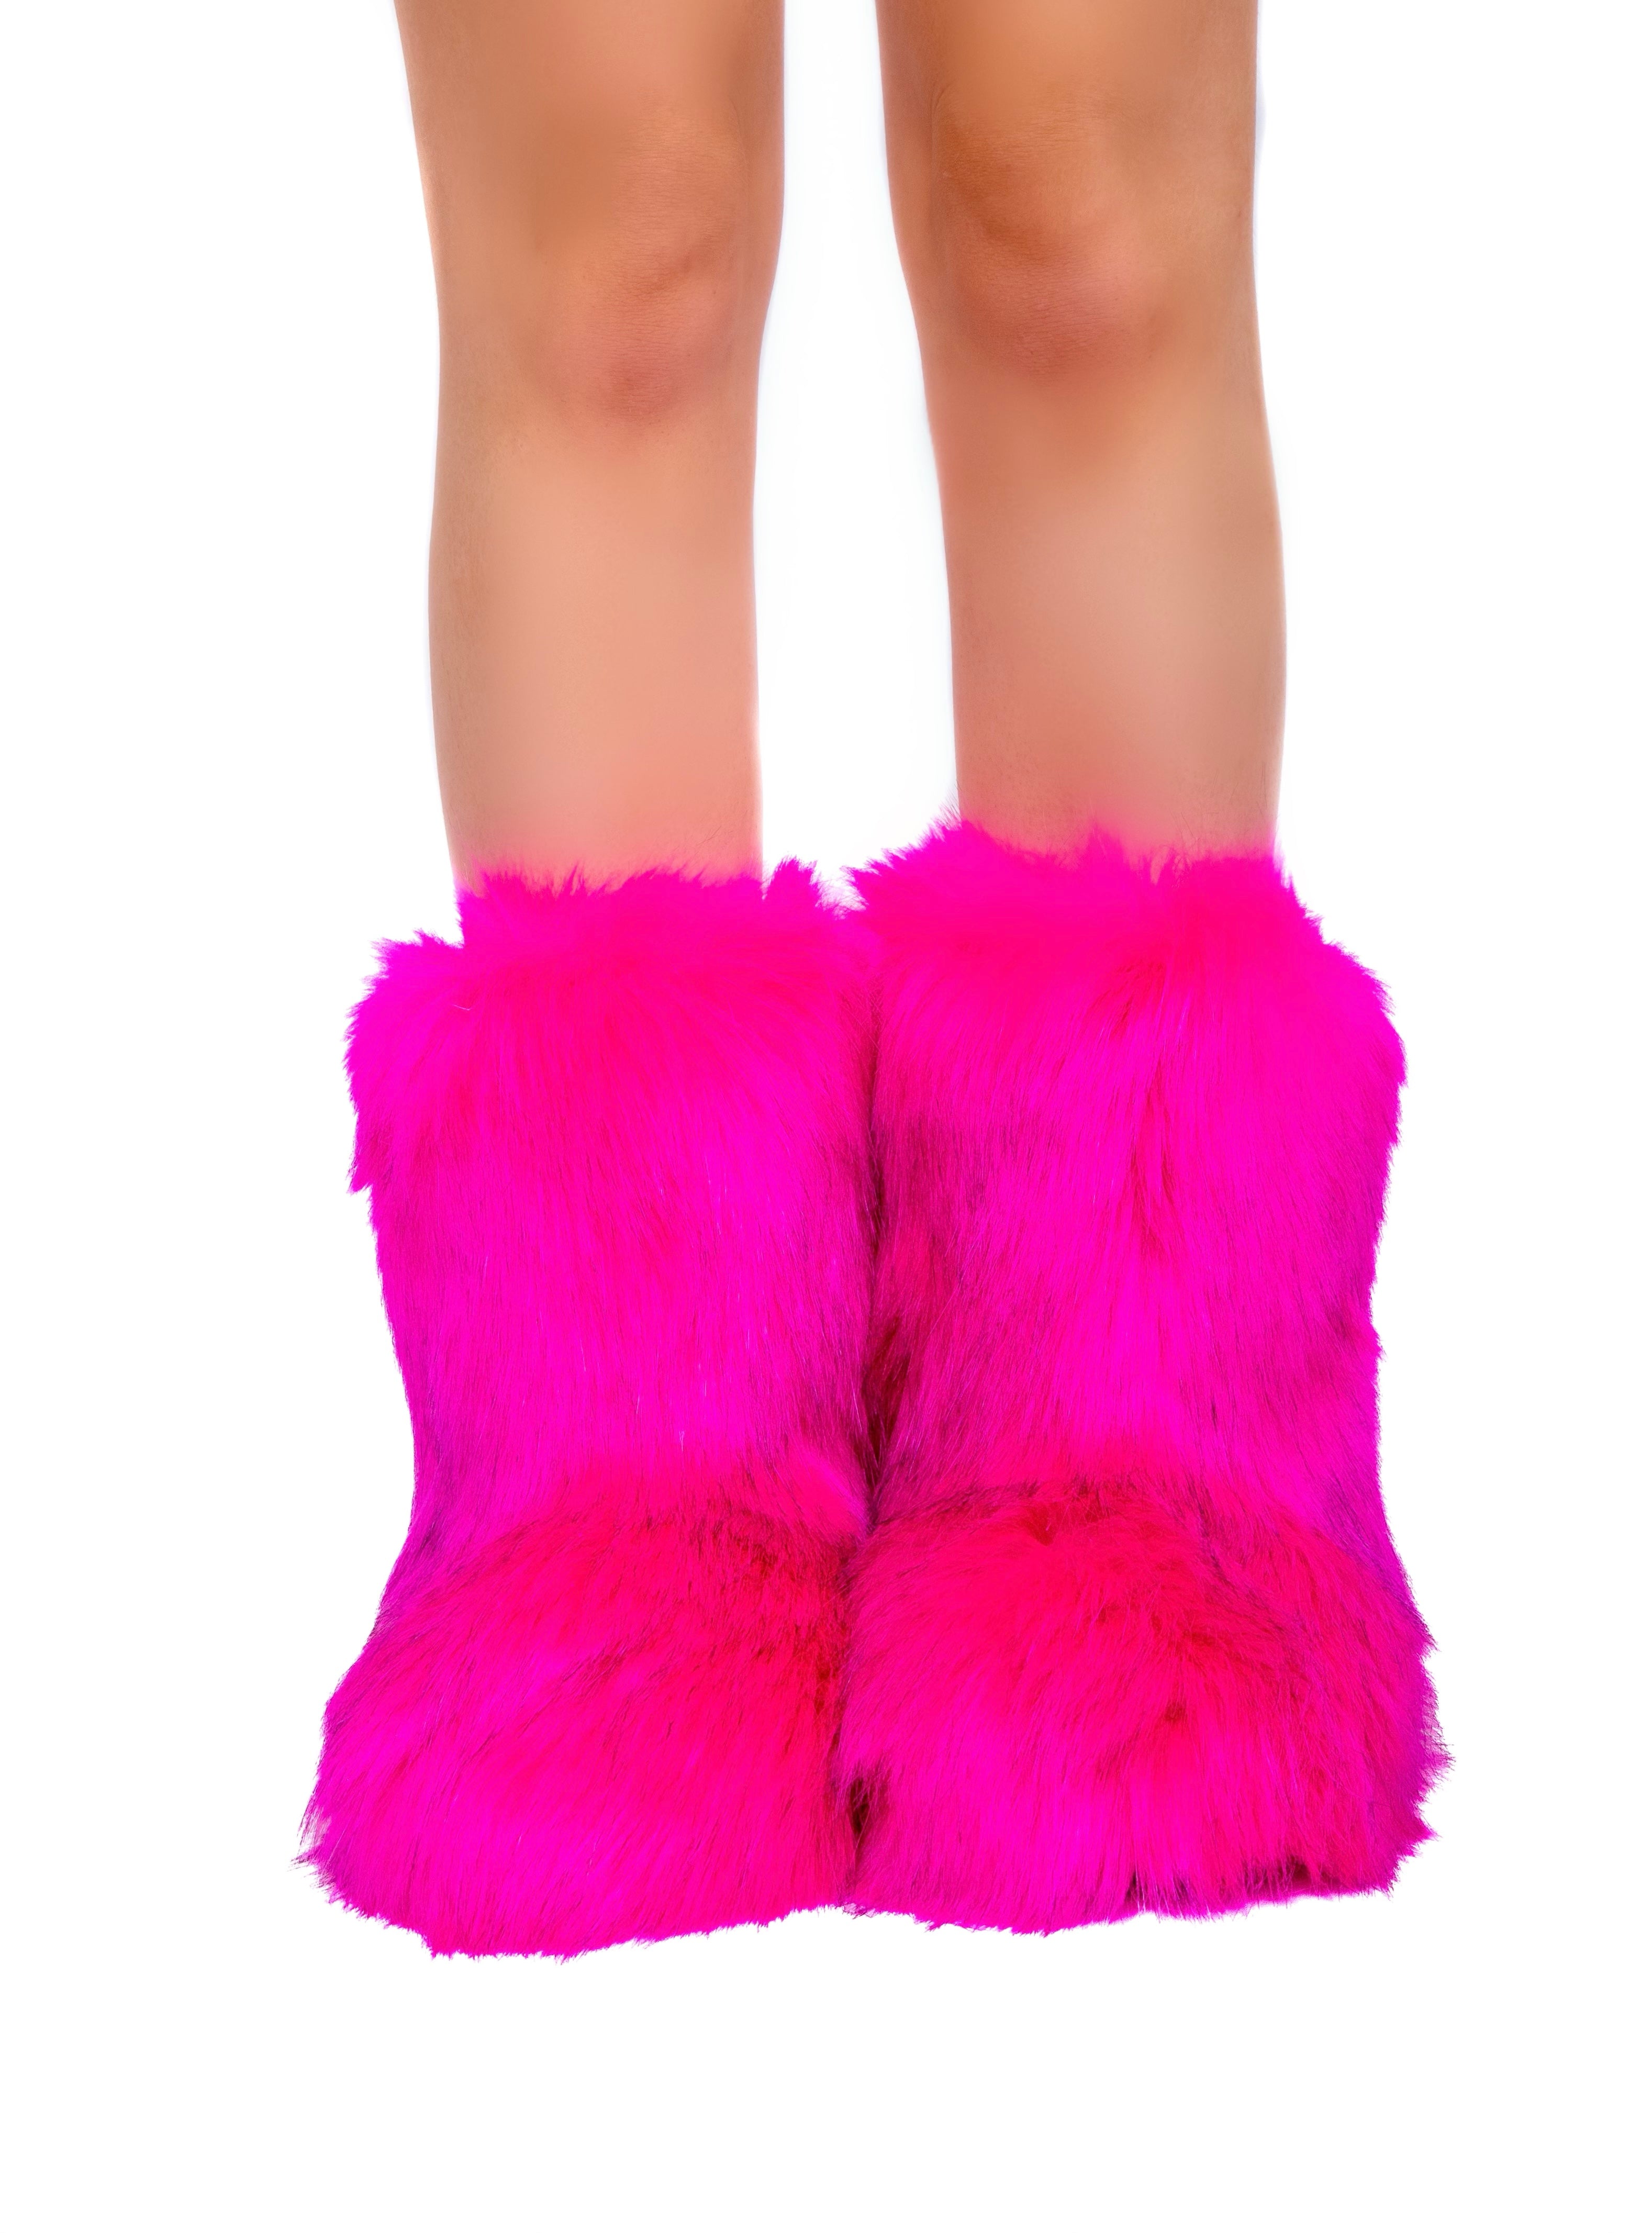 FULL OUTFIT- Hot Pink Fuzzy (4 pcs)